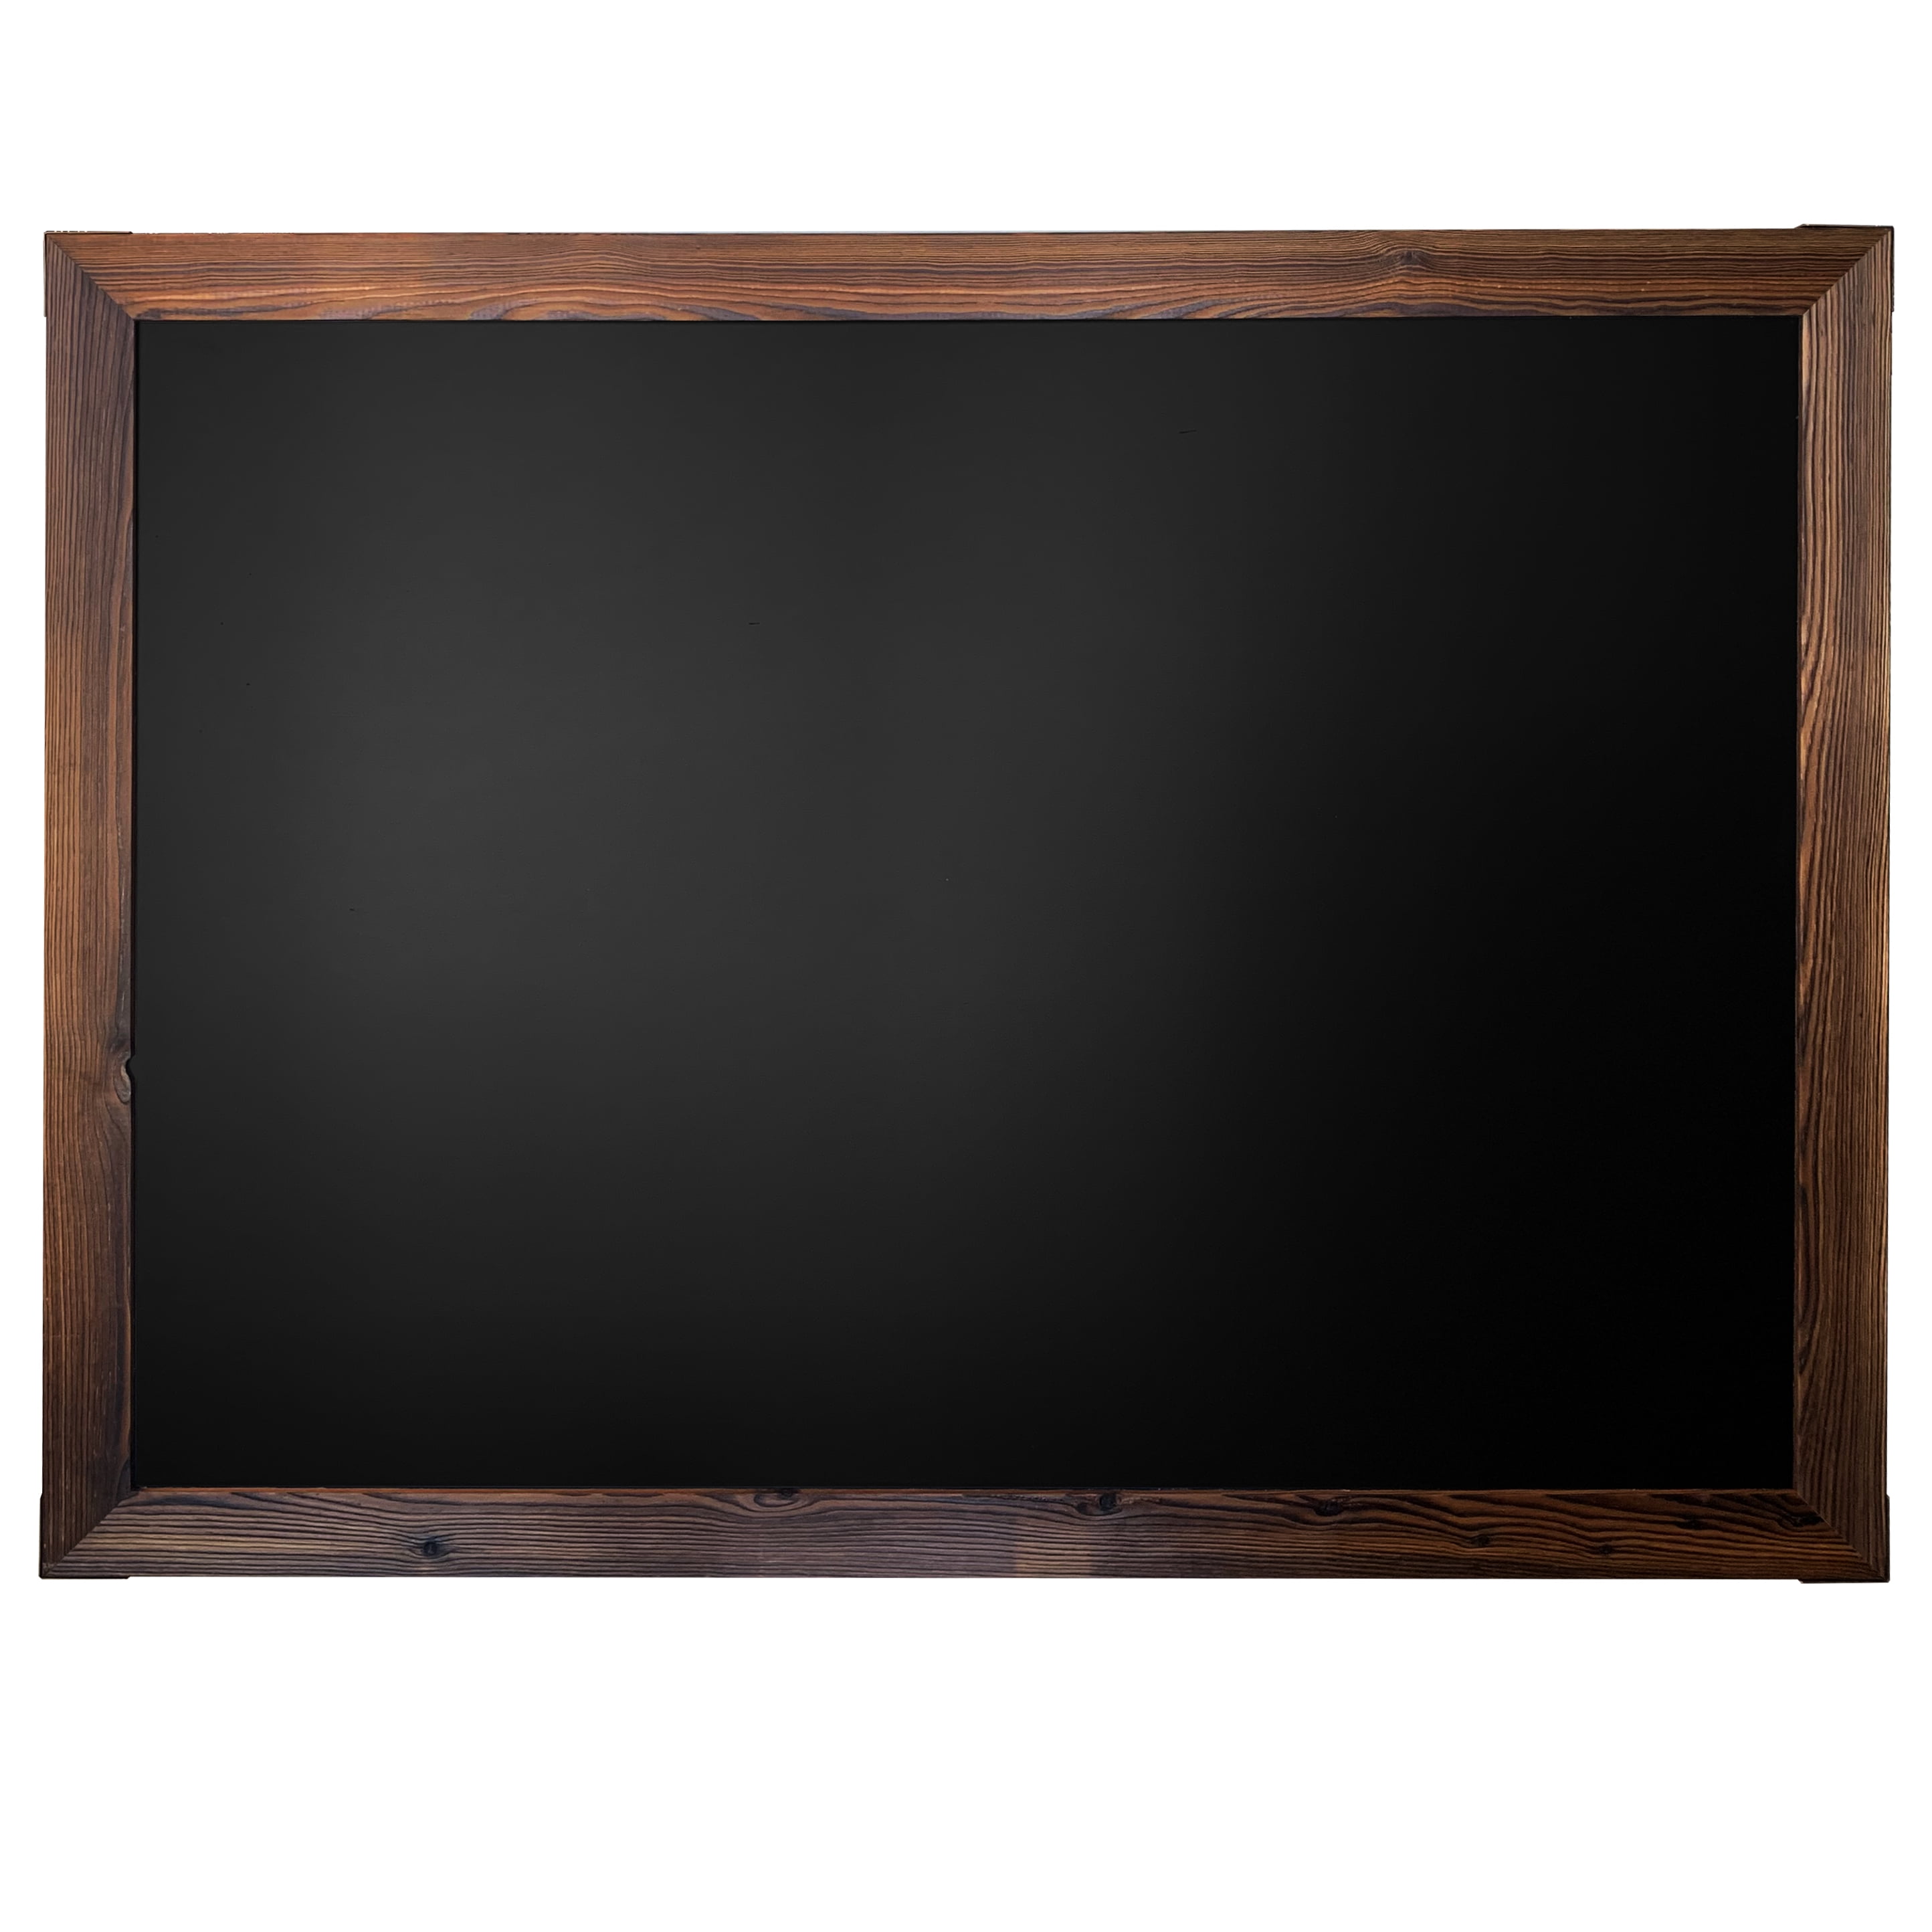 39 x 24 Inches Blackboard Magnetic Wall Magnetic Chalkboard Contact Paper  Large Framed Wall Chalk Bo - Matthews Auctioneers